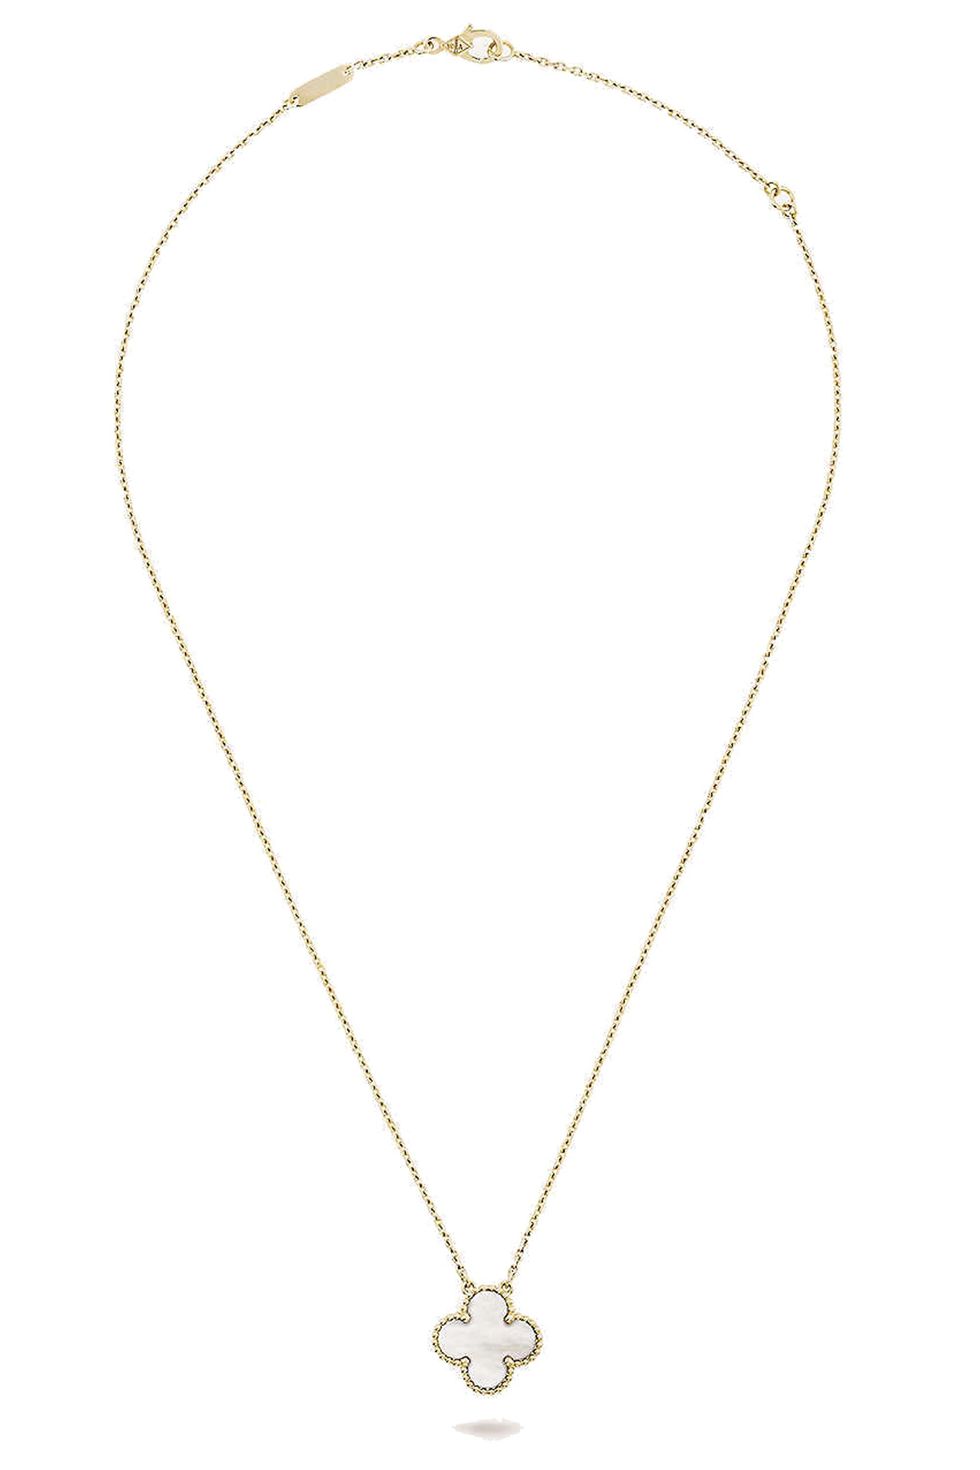 Elegant Pieces of Jewelry to Buy For the Precious Women in Your Life -  LUXlife Magazine